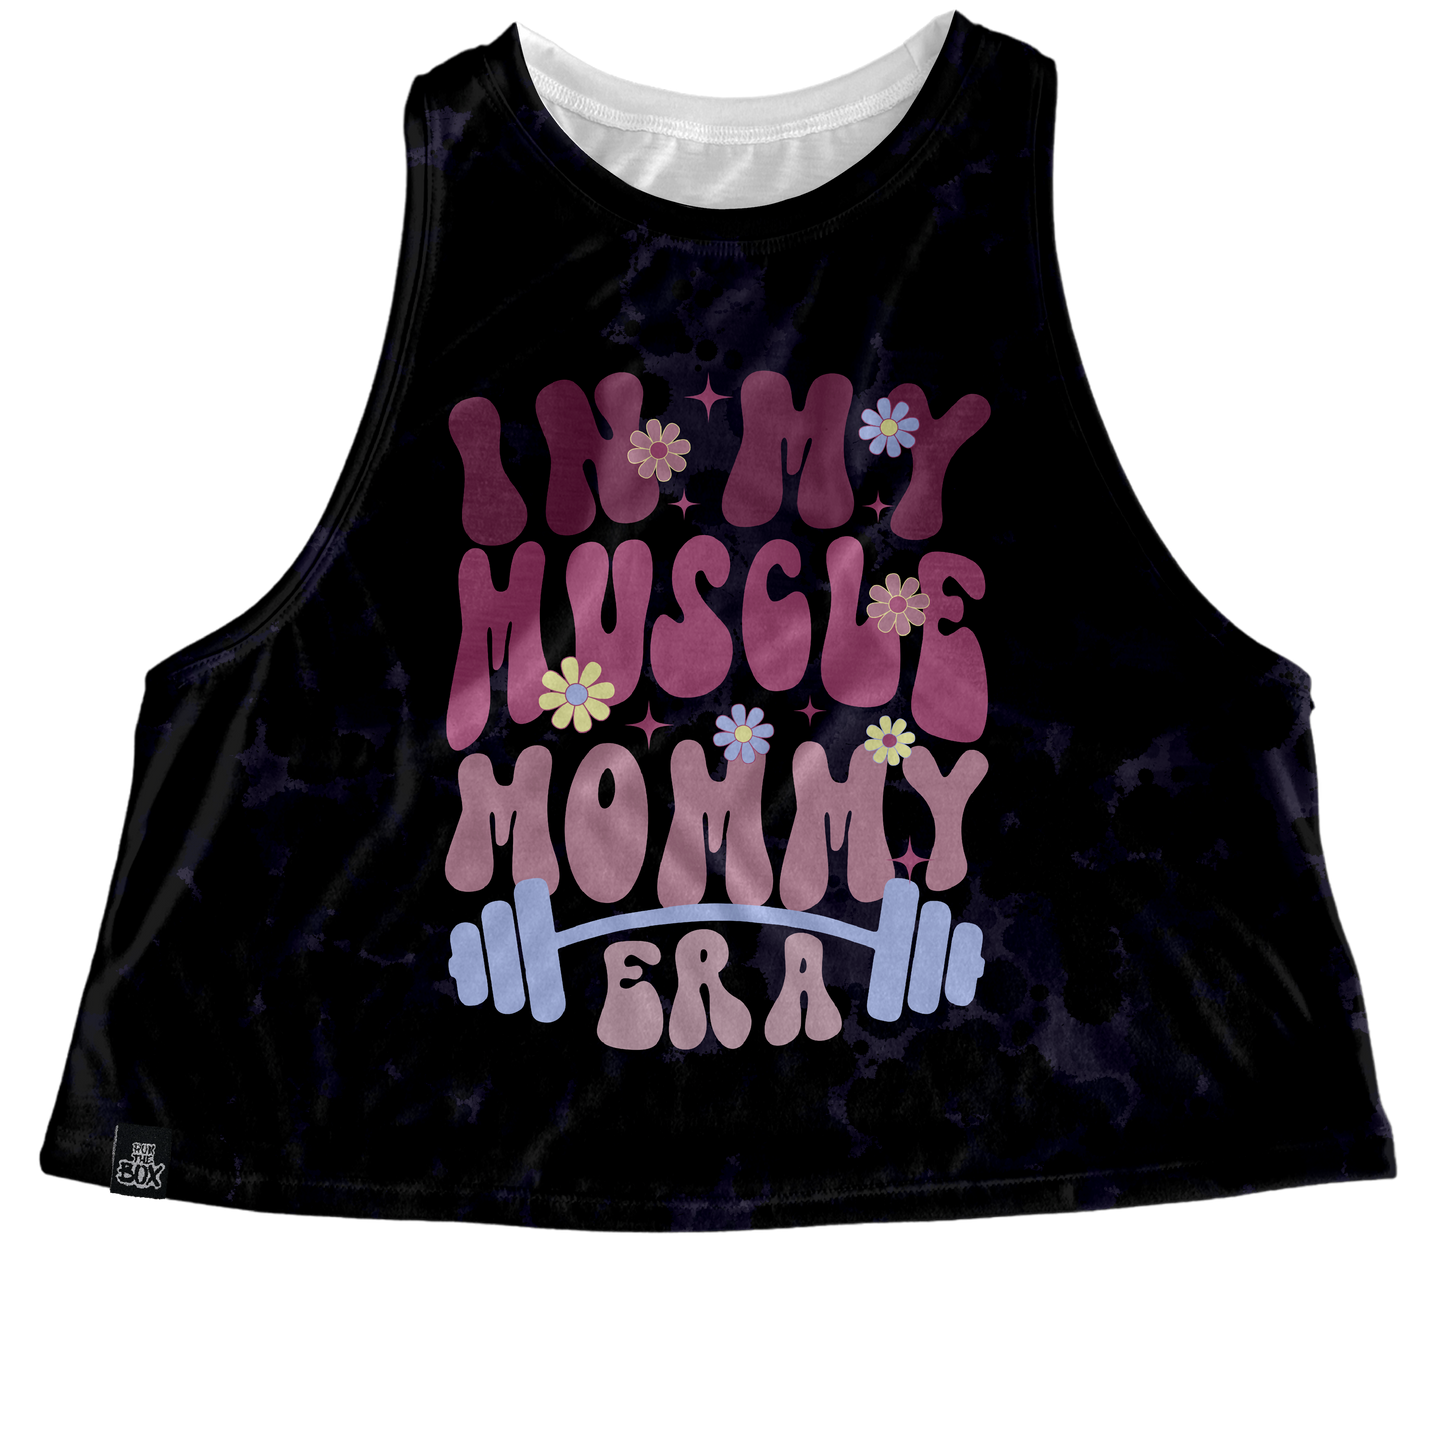 Muscle Mommy (black) Tops